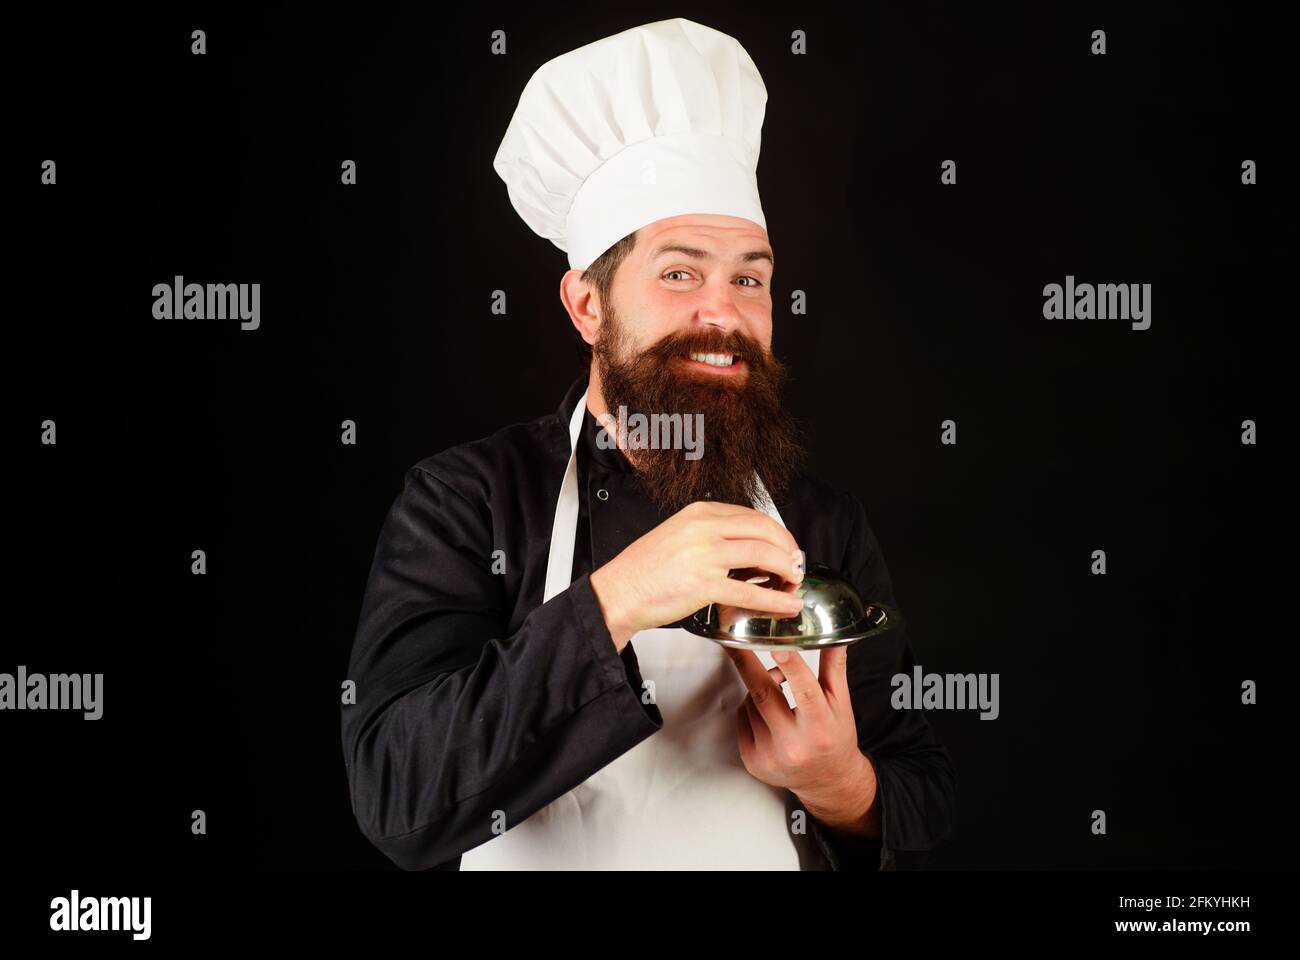 Restaurant serving and presentation. Male chef with food tray. Cook with cloche in restaurant. Stock Photo